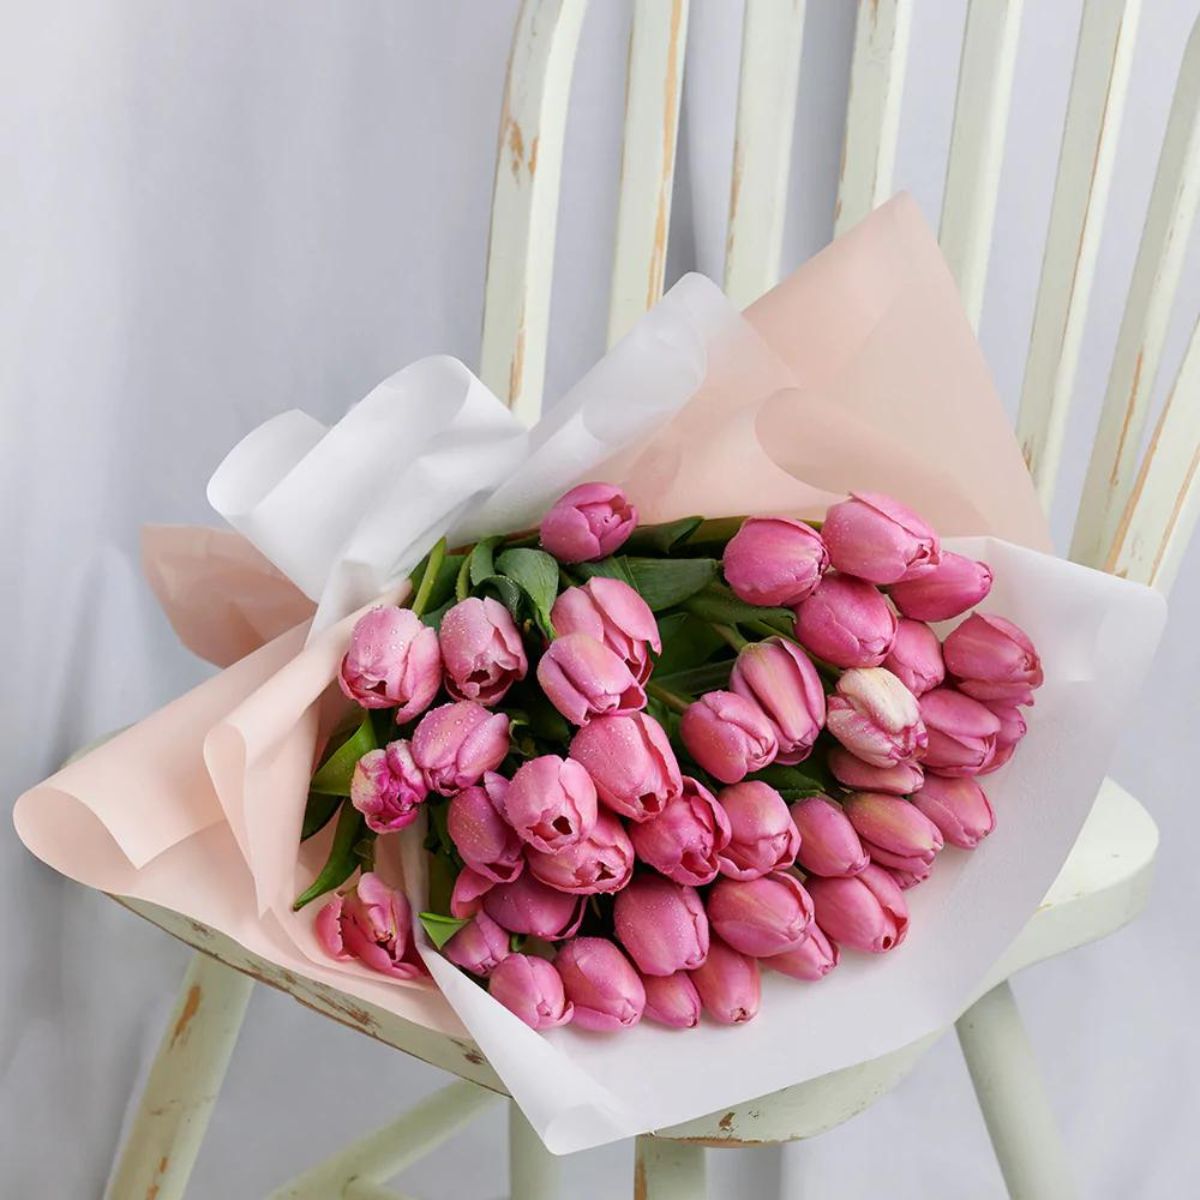 Tulips are one of the nine romantic flowers for vday